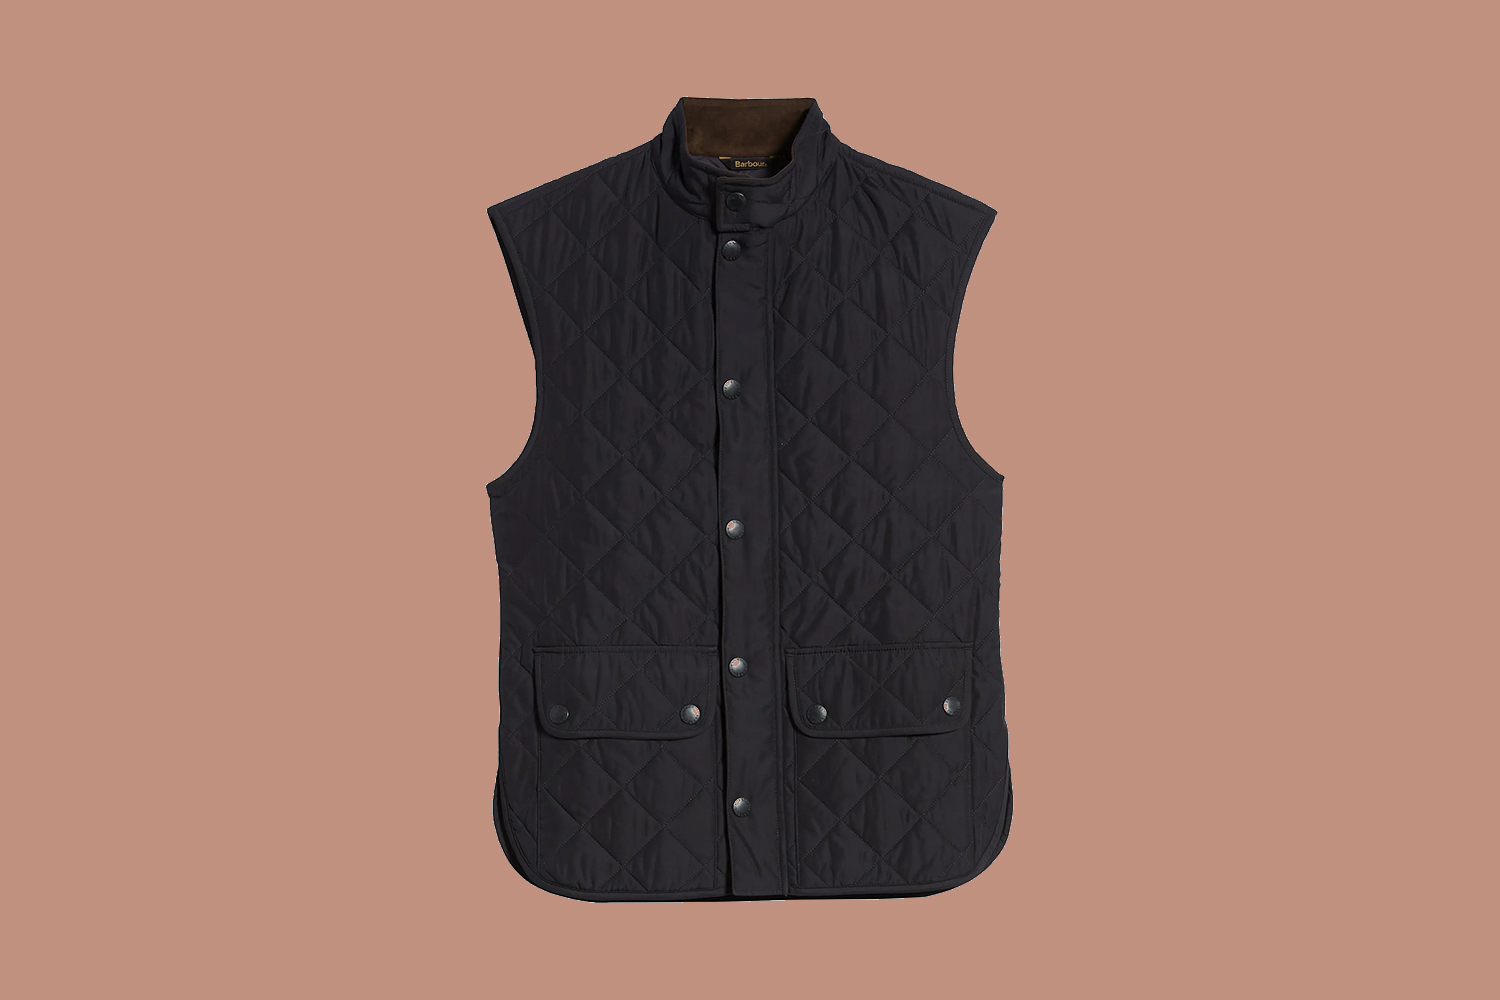 Deal: This Barbour Vest Is 60% Off at Nordstrom